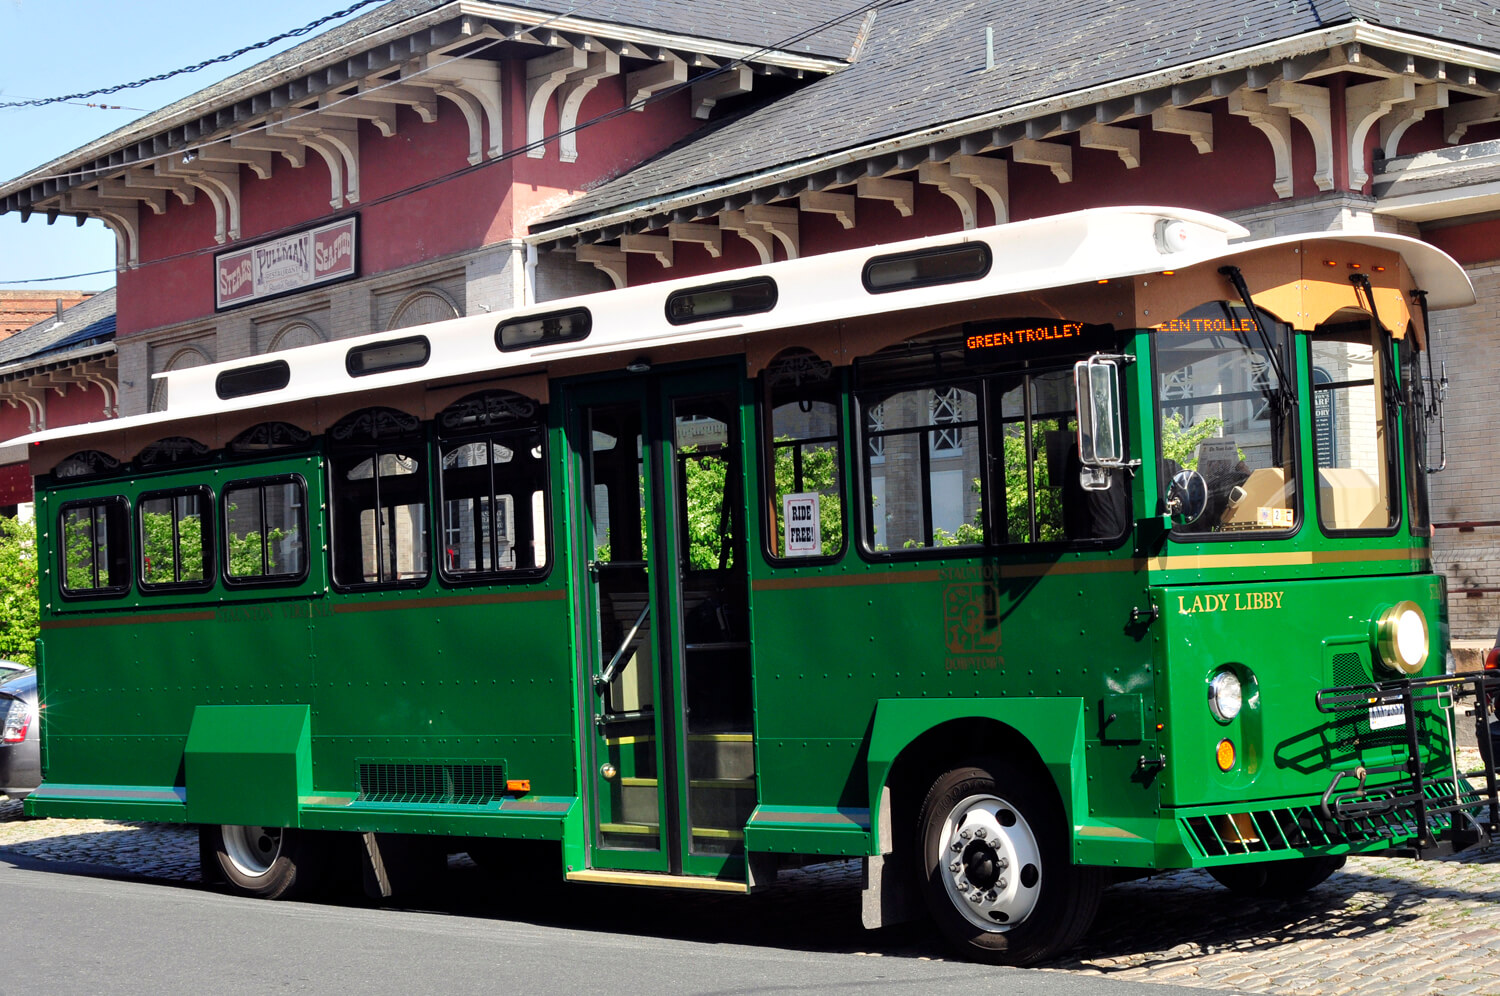 A side view of Staunton's green Trolley.